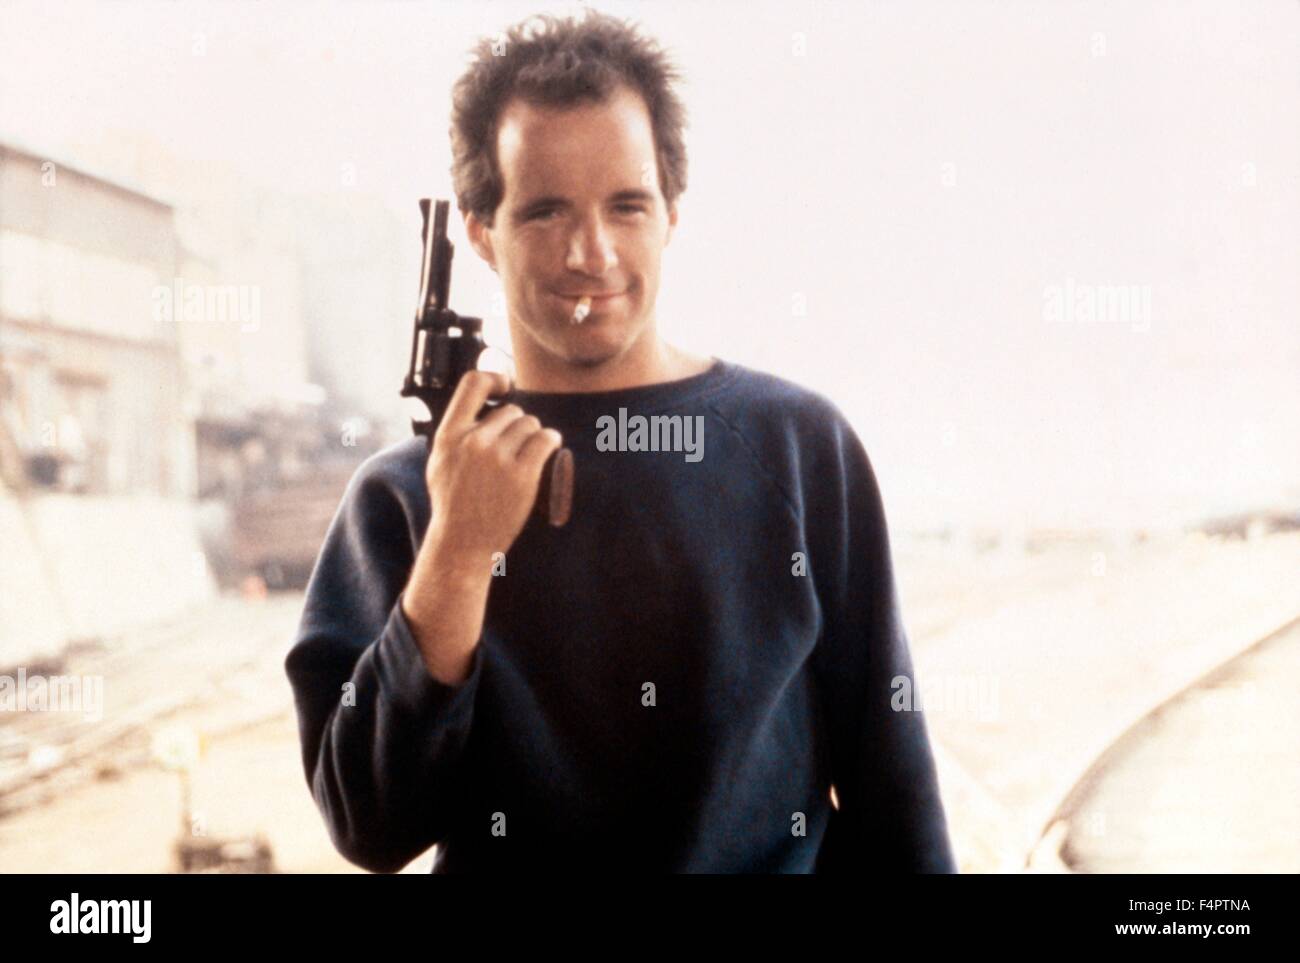 John Pankow / To Live and Die in L.A. / 1985 directed by William Friedkin [MGM / UA Entertainment Co.] Stock Photo